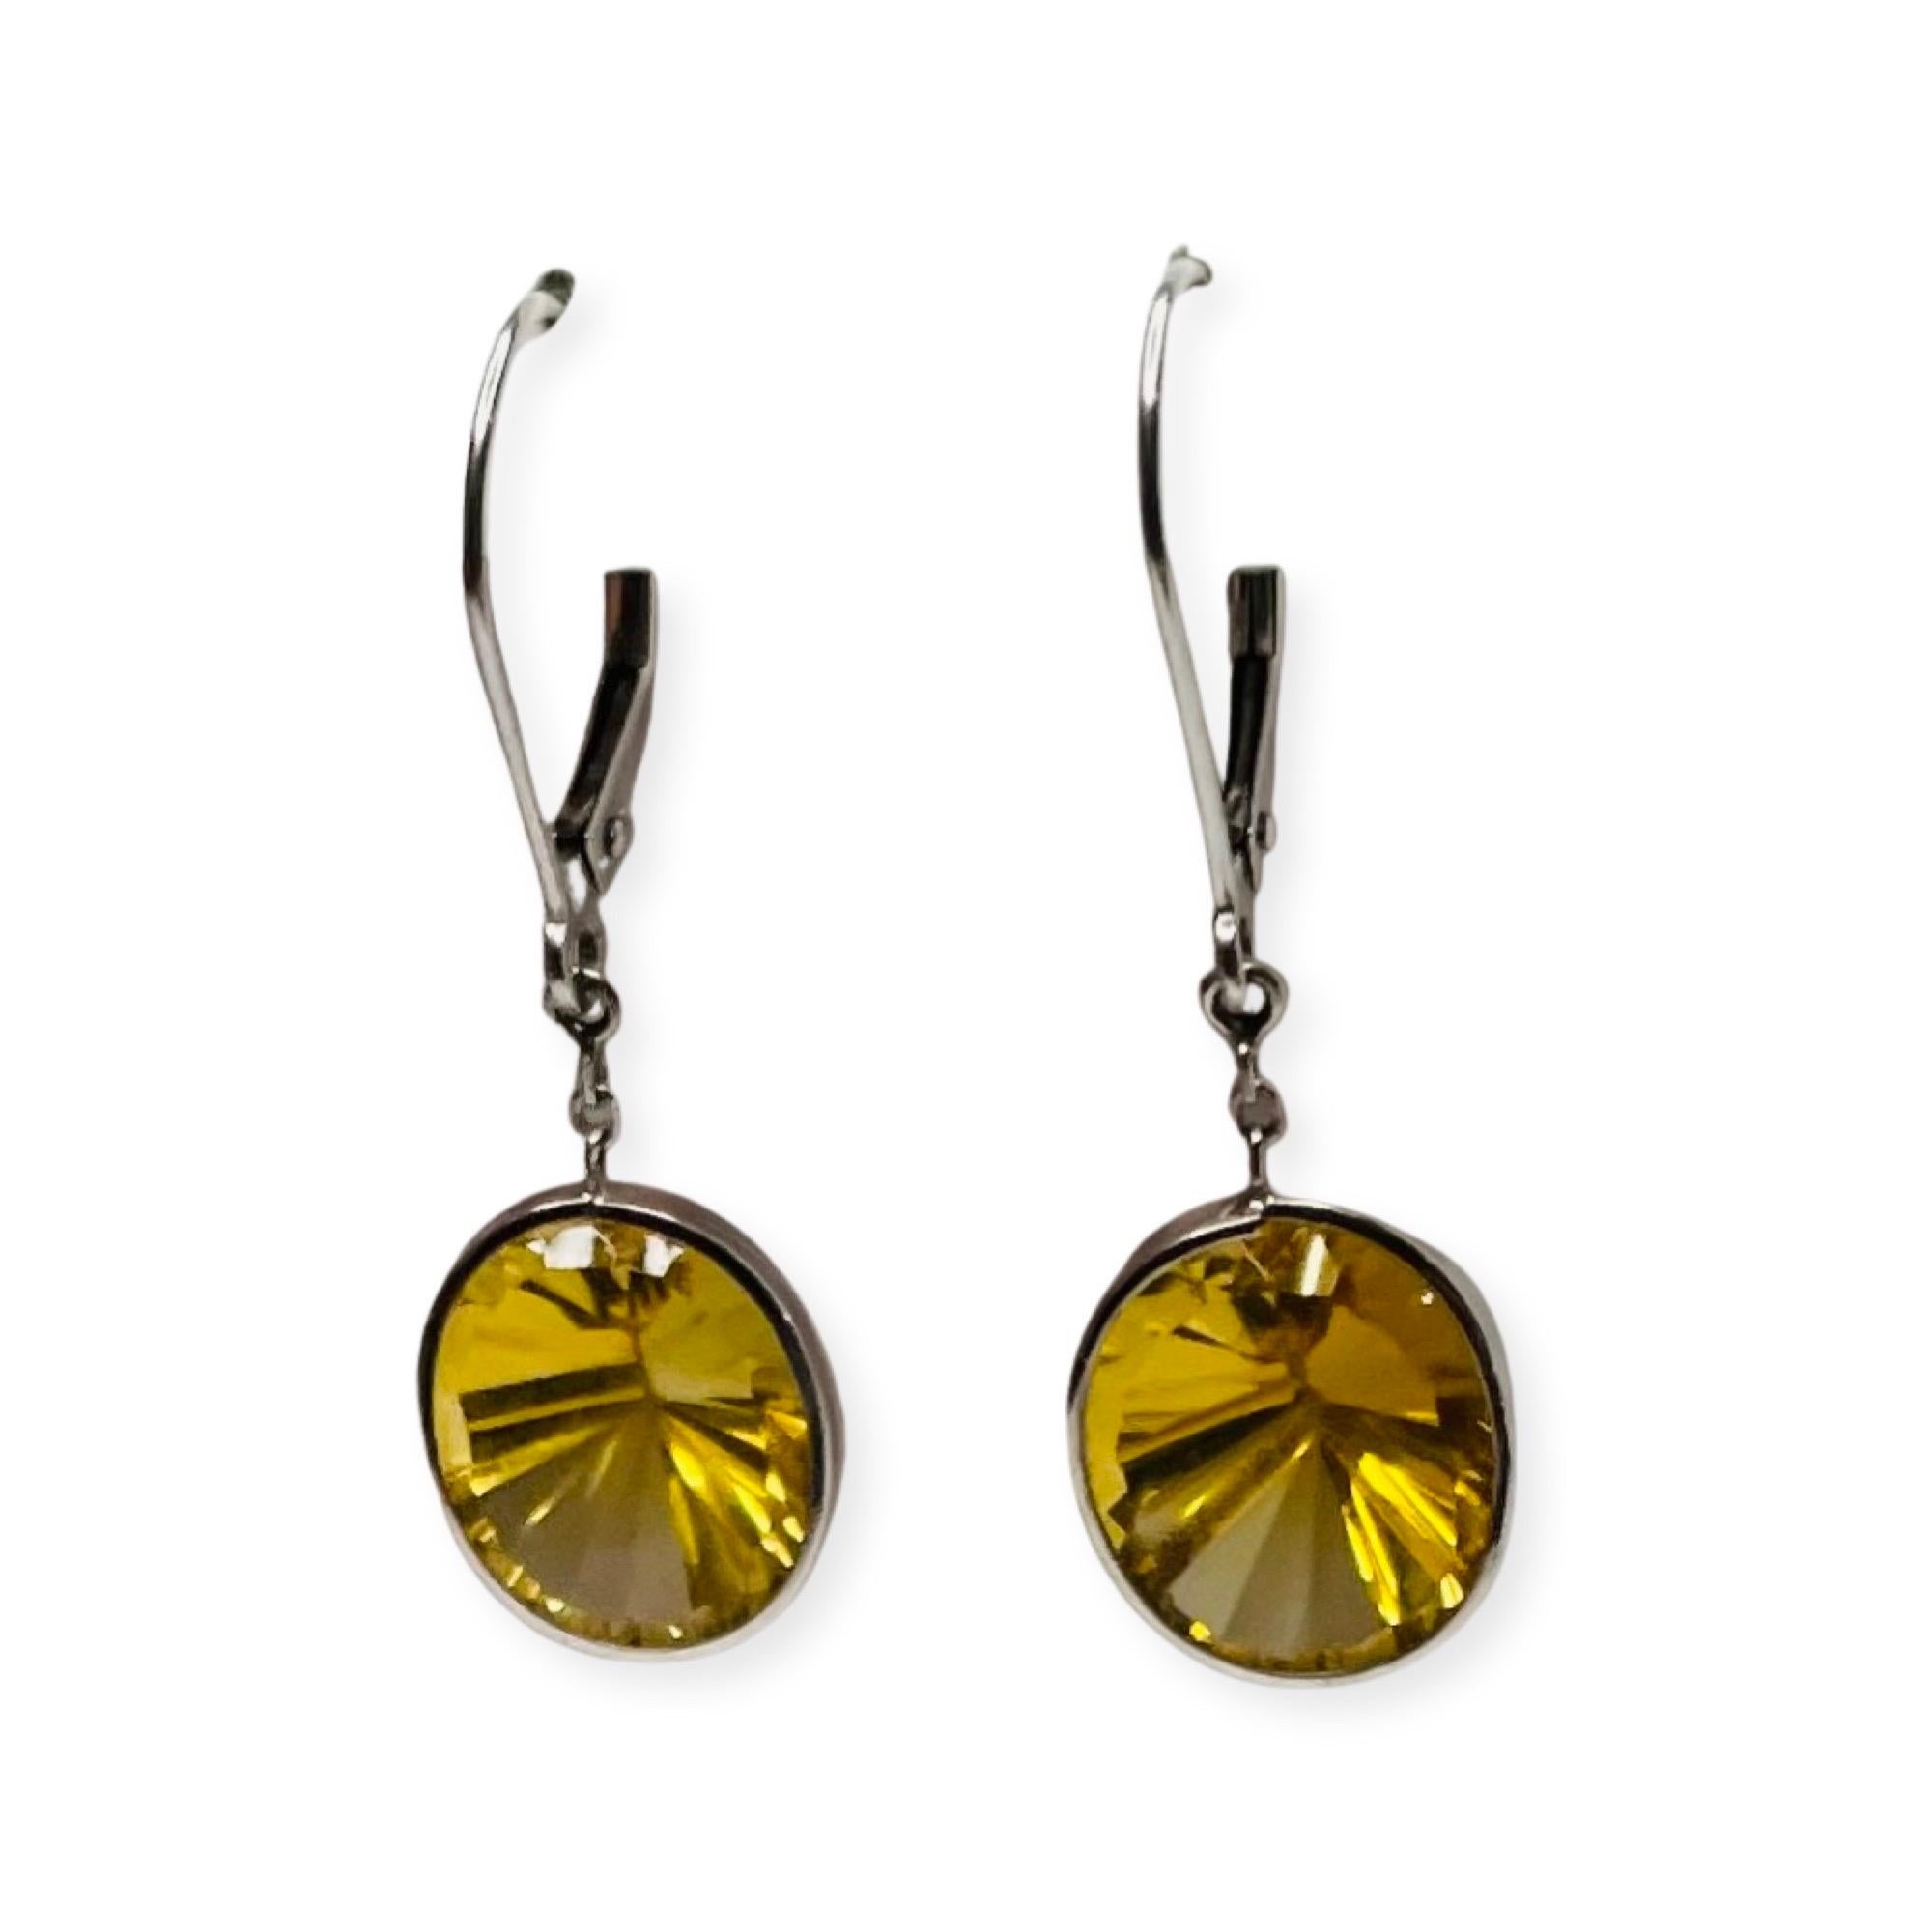 Lithos 14K white Gold Citrine Earrings. There are 12 carats of citrine bezel set in 14K white gold  They have french wires. They measure 10.0 mm x 14.0 mm. 400-70-841